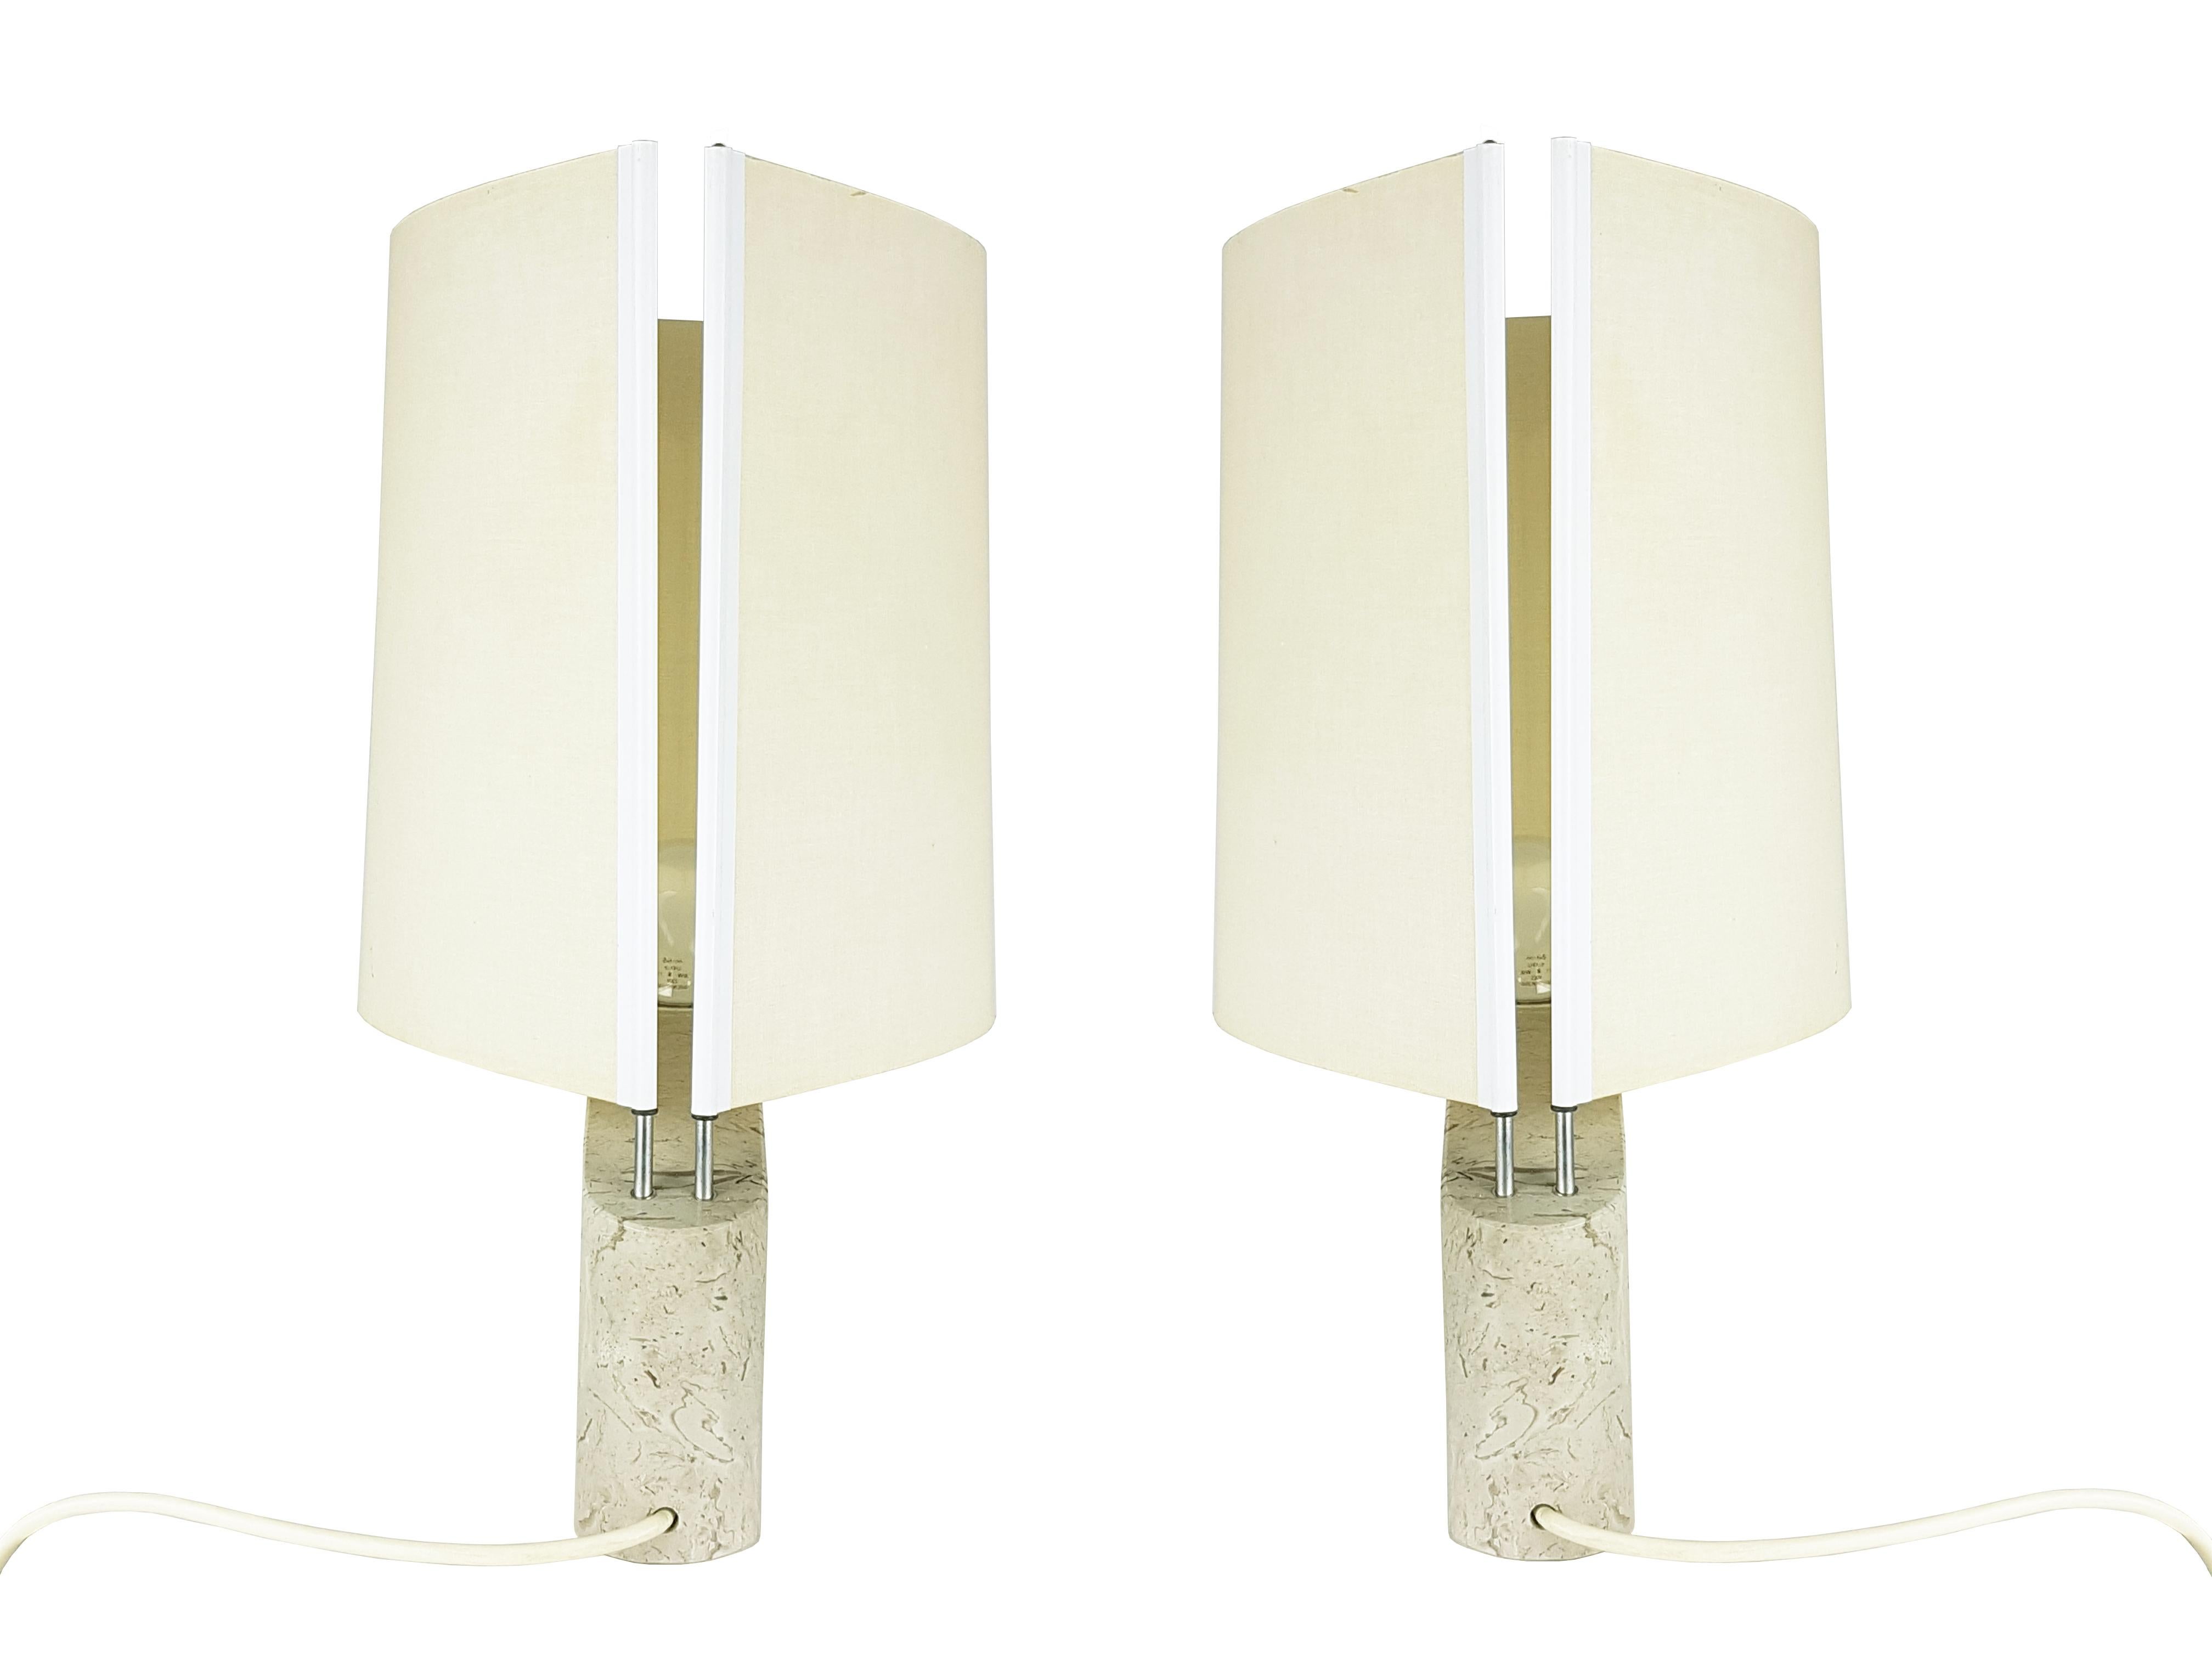 Pair of beautiful and elegant table lamps from the Italian manufacturer Ibis.
This set was produced between the 70s and 80s with a marble base, metal rods and lampshades in plasticized fabric.
the lamps are also suitable for placing on bedside